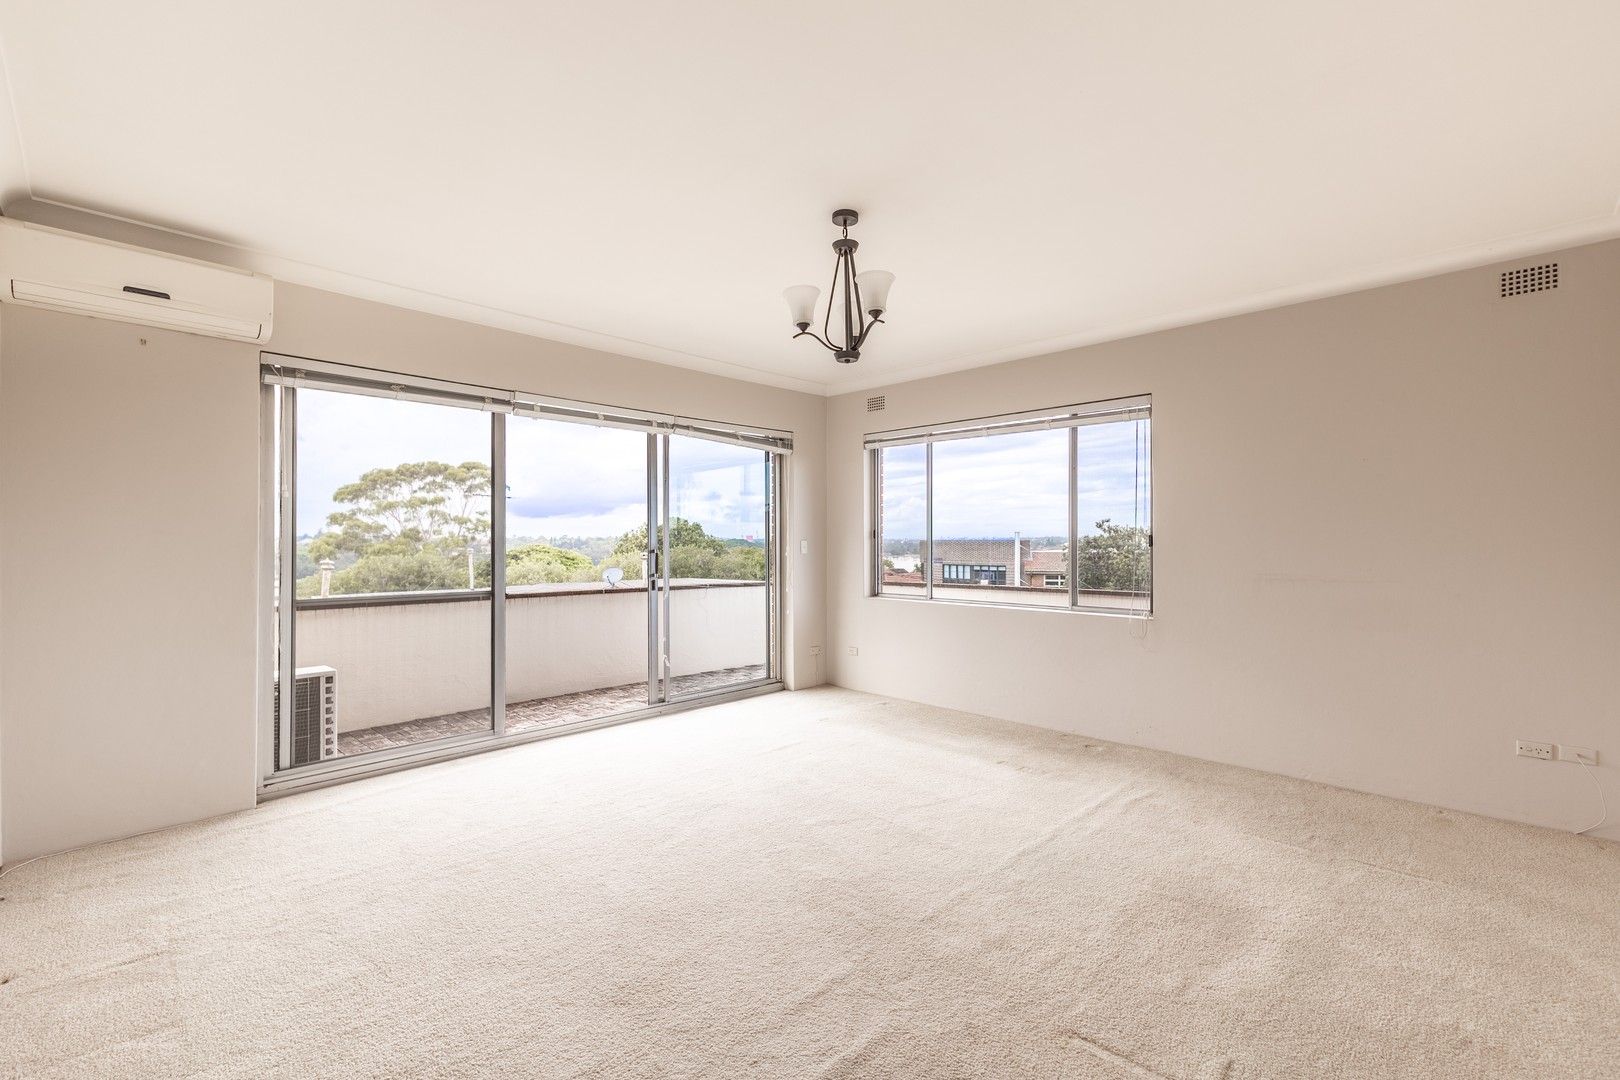 2 bedrooms Apartment / Unit / Flat in 9/14 Tranmere Street DRUMMOYNE NSW, 2047